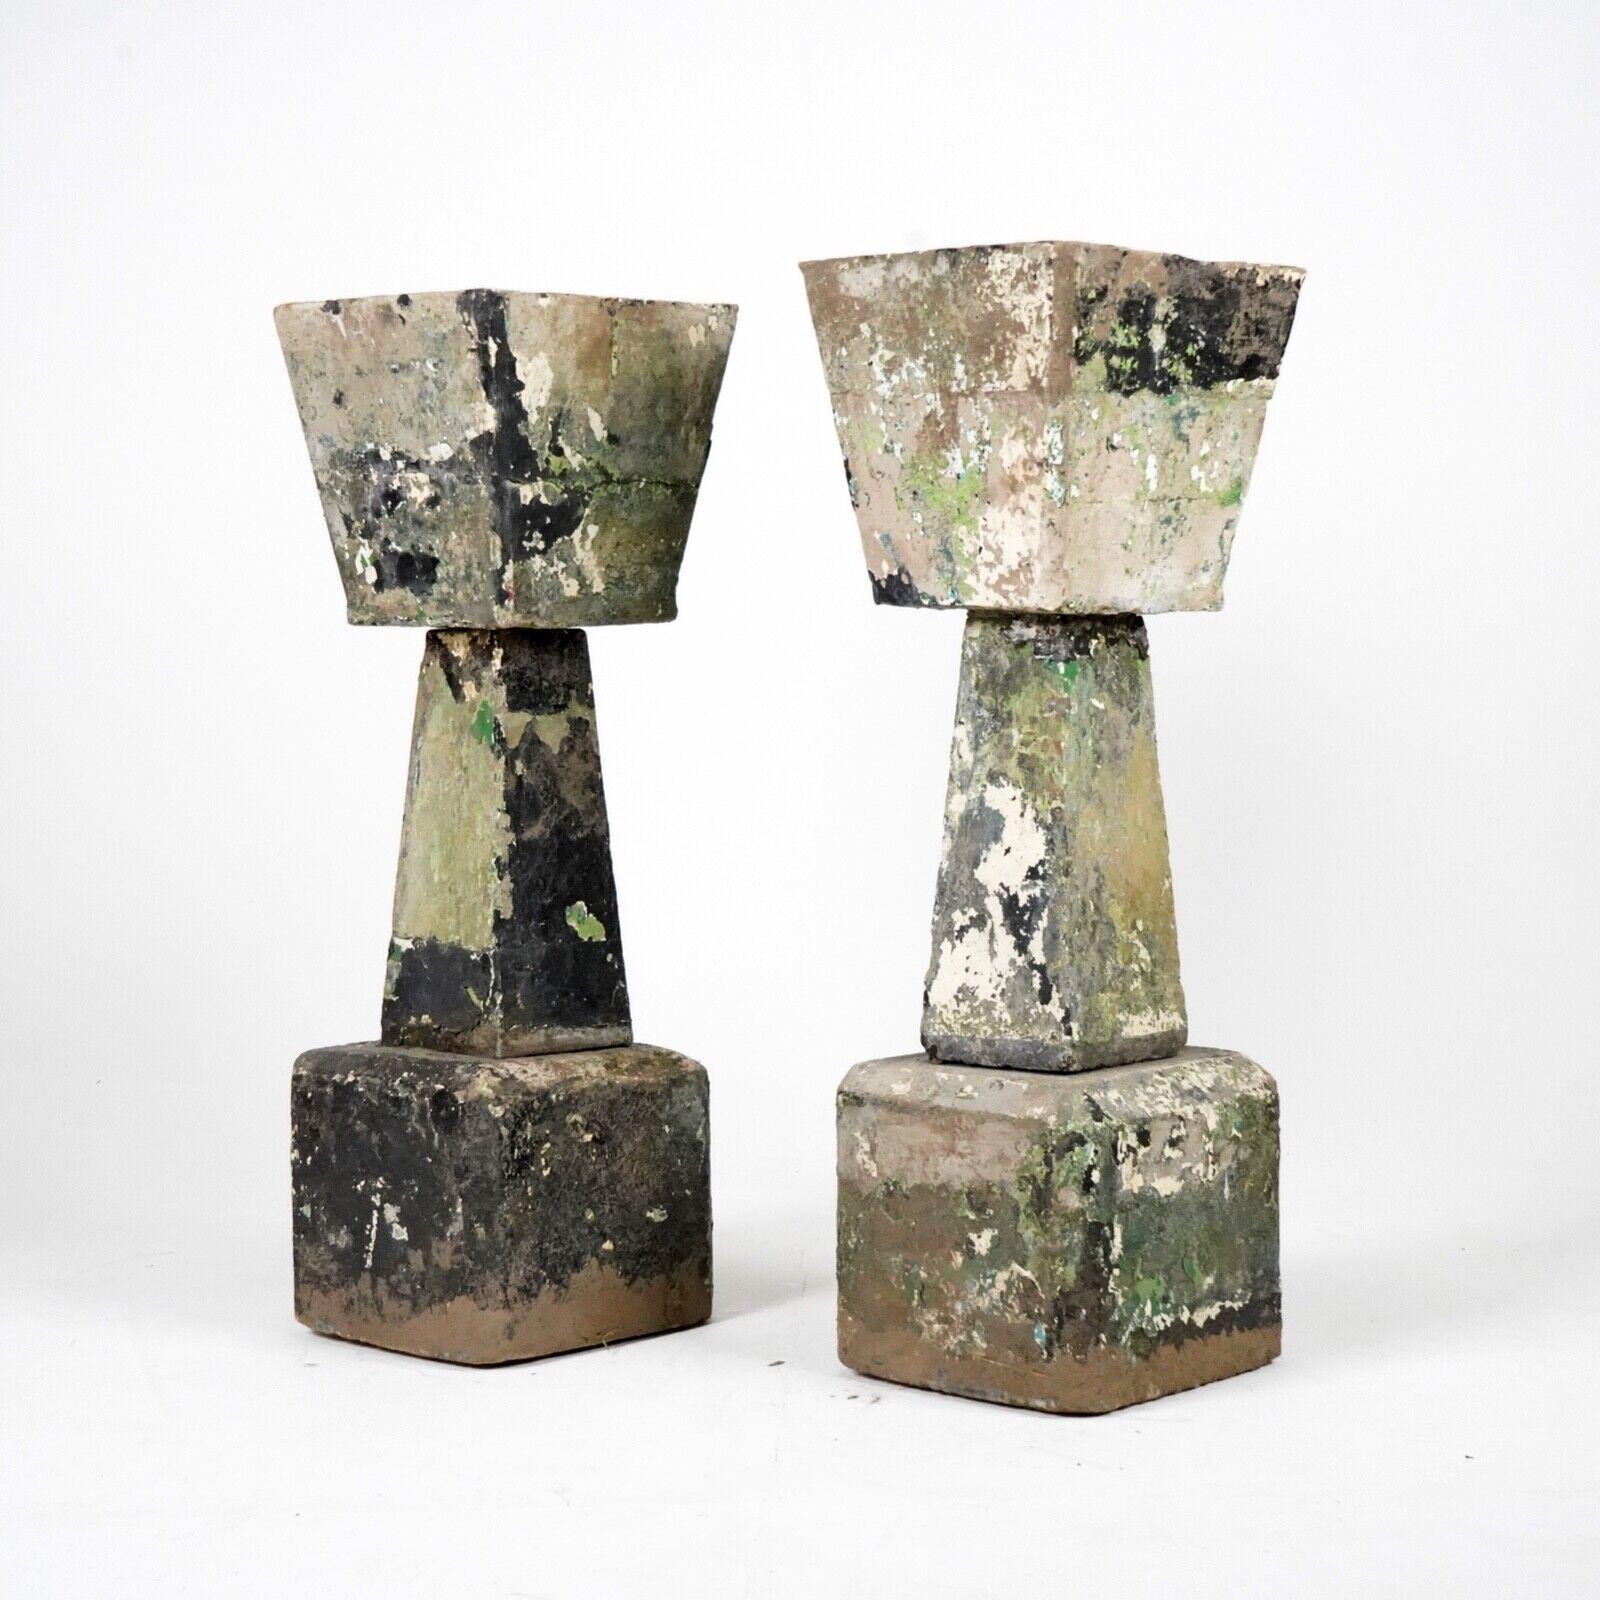 A great pair of monumental stone planters. With strong angular shape and excellent patina in green, blacks and whites. A striking pair that are extreme heavy.  

Dimensions
H 98cm, W 33cm D 33cm 
 
Condition 
Please do take a careful look at all our